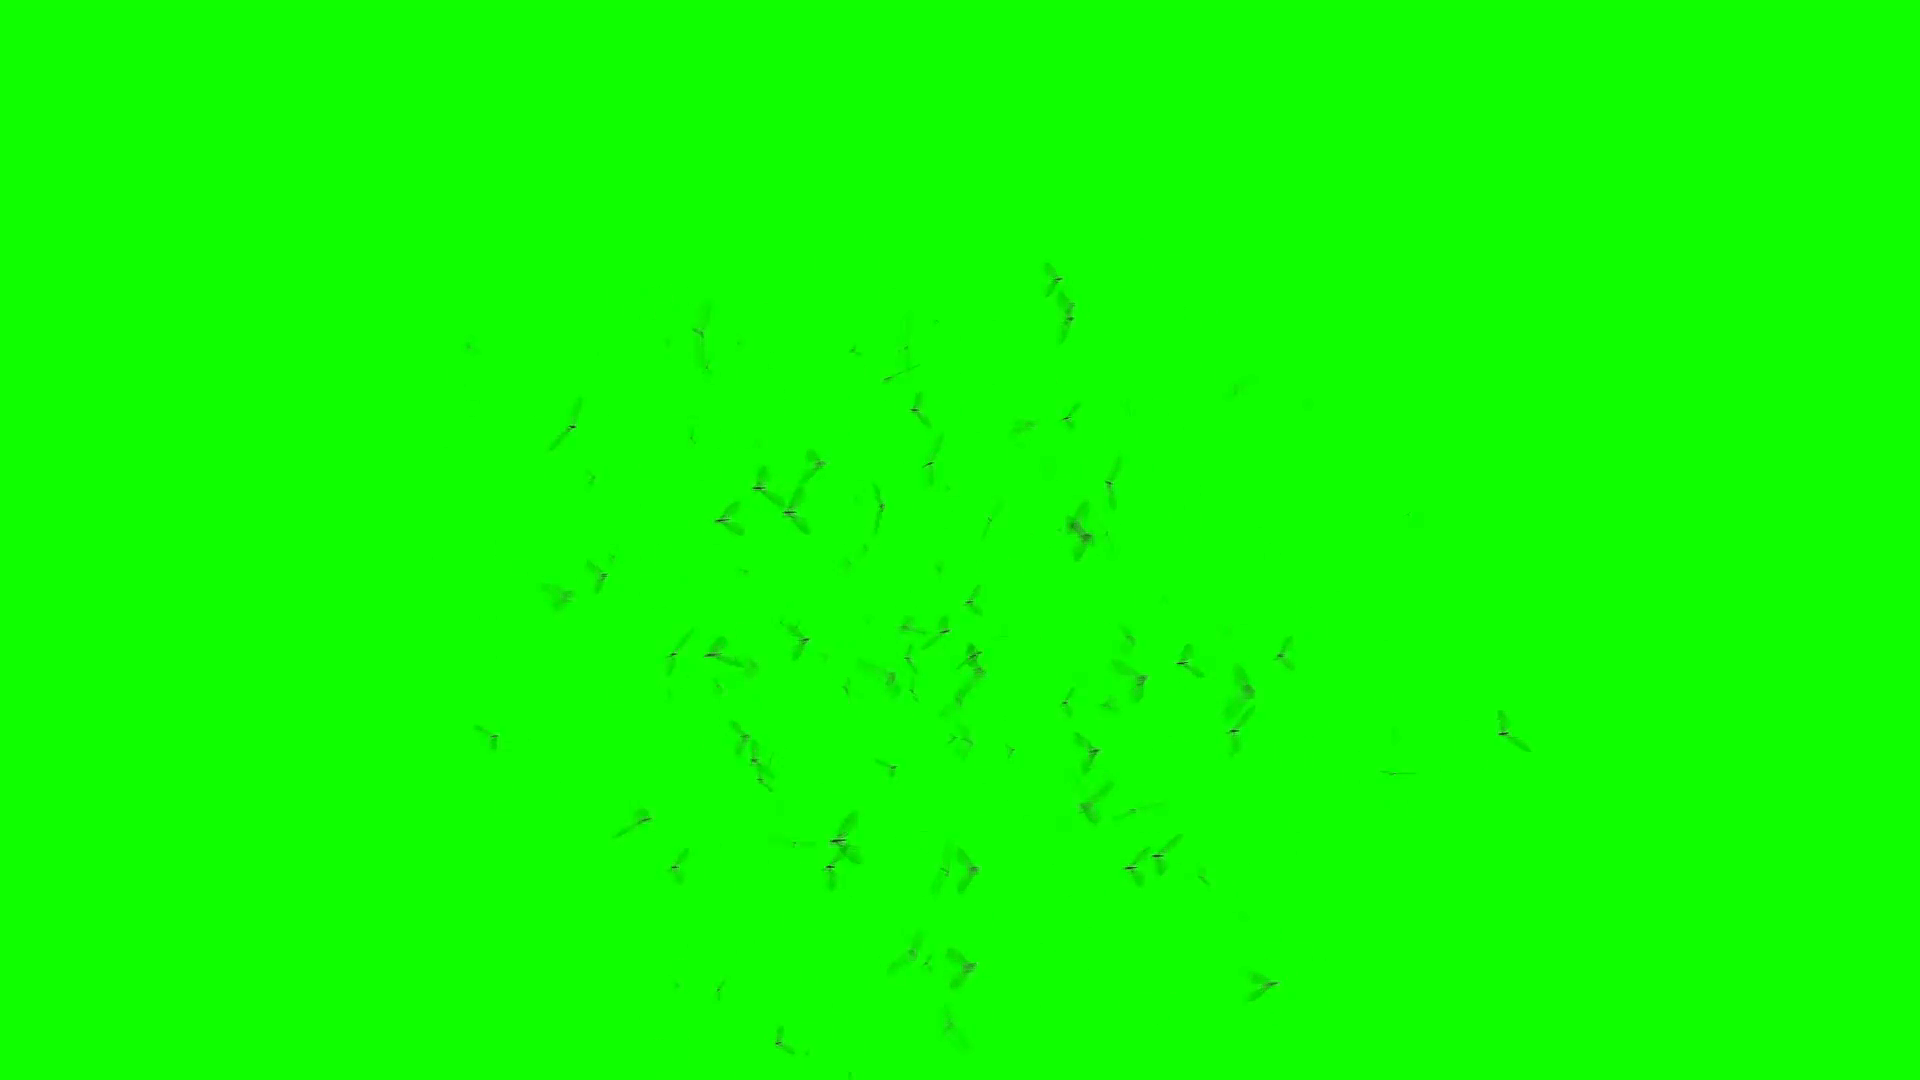 Swarm of Flying Insects with Camera Movement on a Green Screen